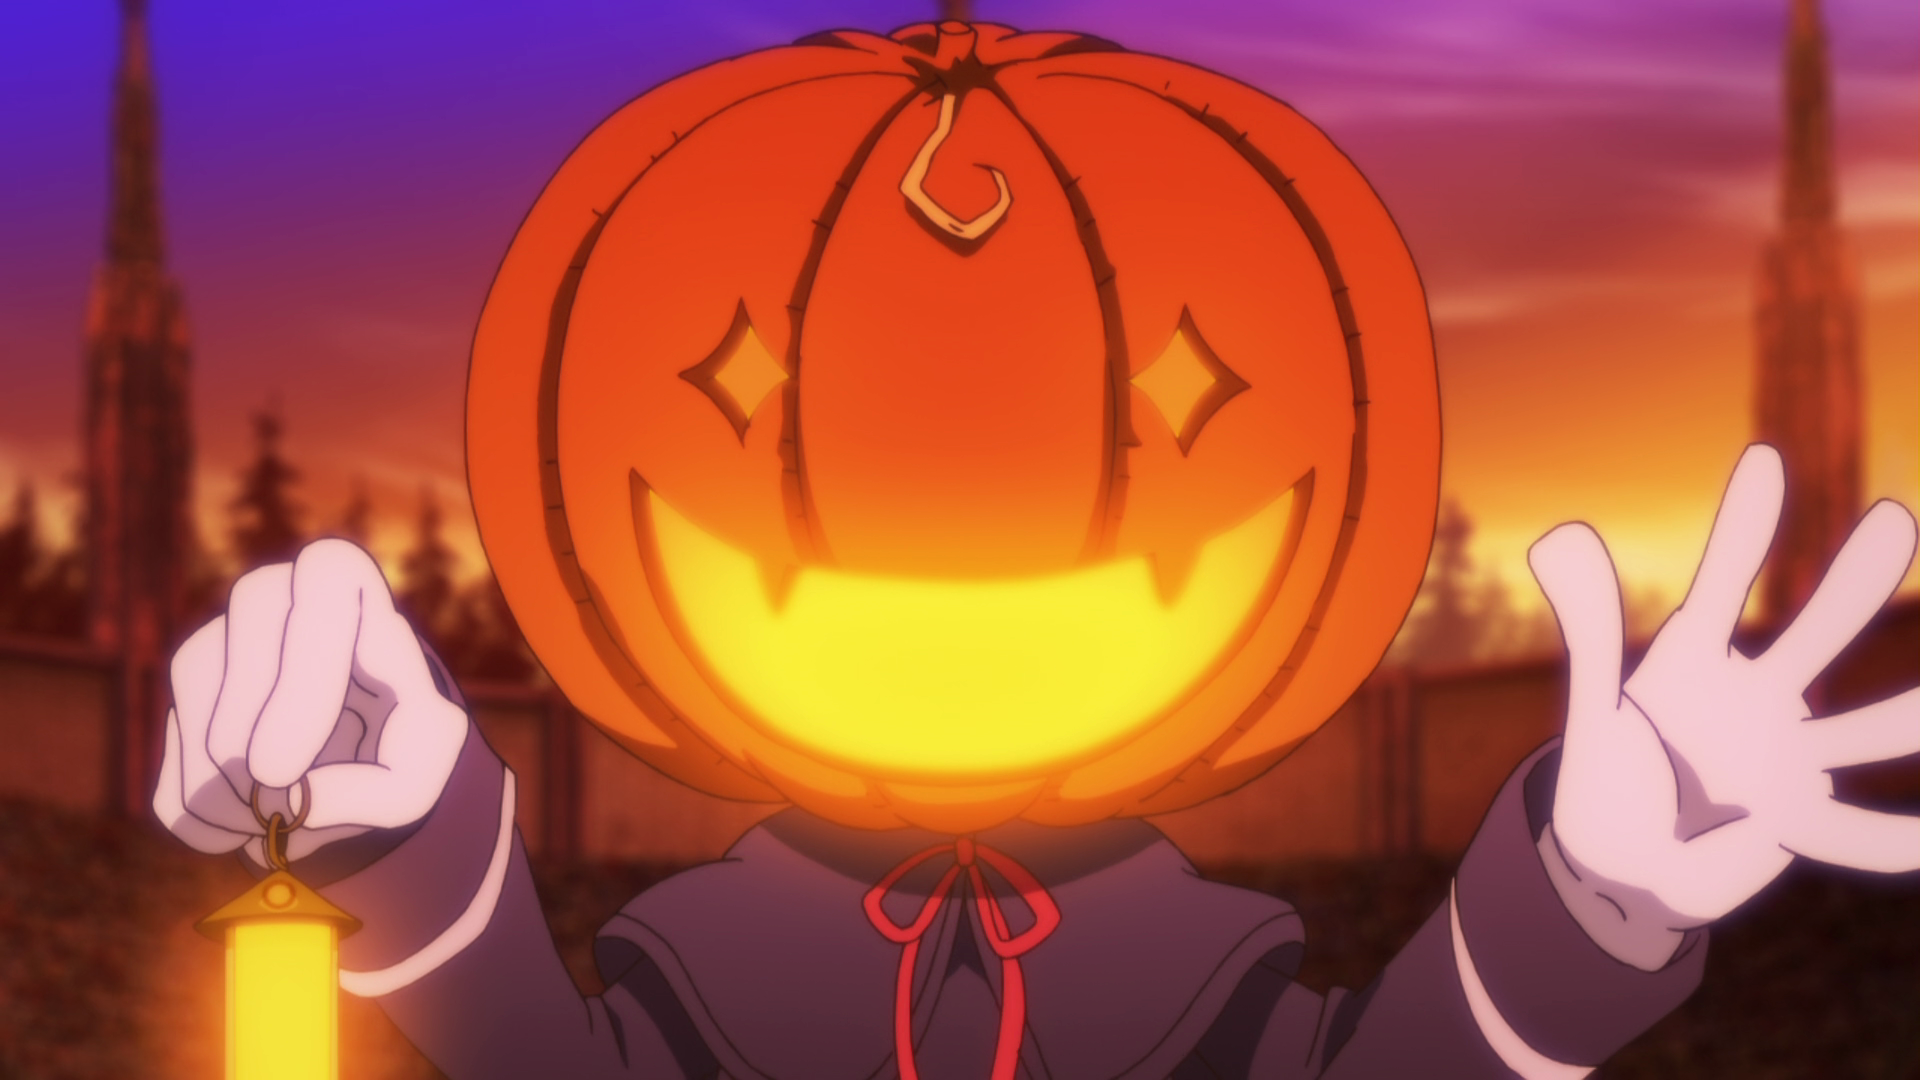 Anime On ComicBookcom on Twitter Just in time for Halloween Red Riot of  MyHeroAcademia gets his very own JackOLantern httpstcoTg4RLXhhoy  httpstcoMocHDVDjZI  Twitter